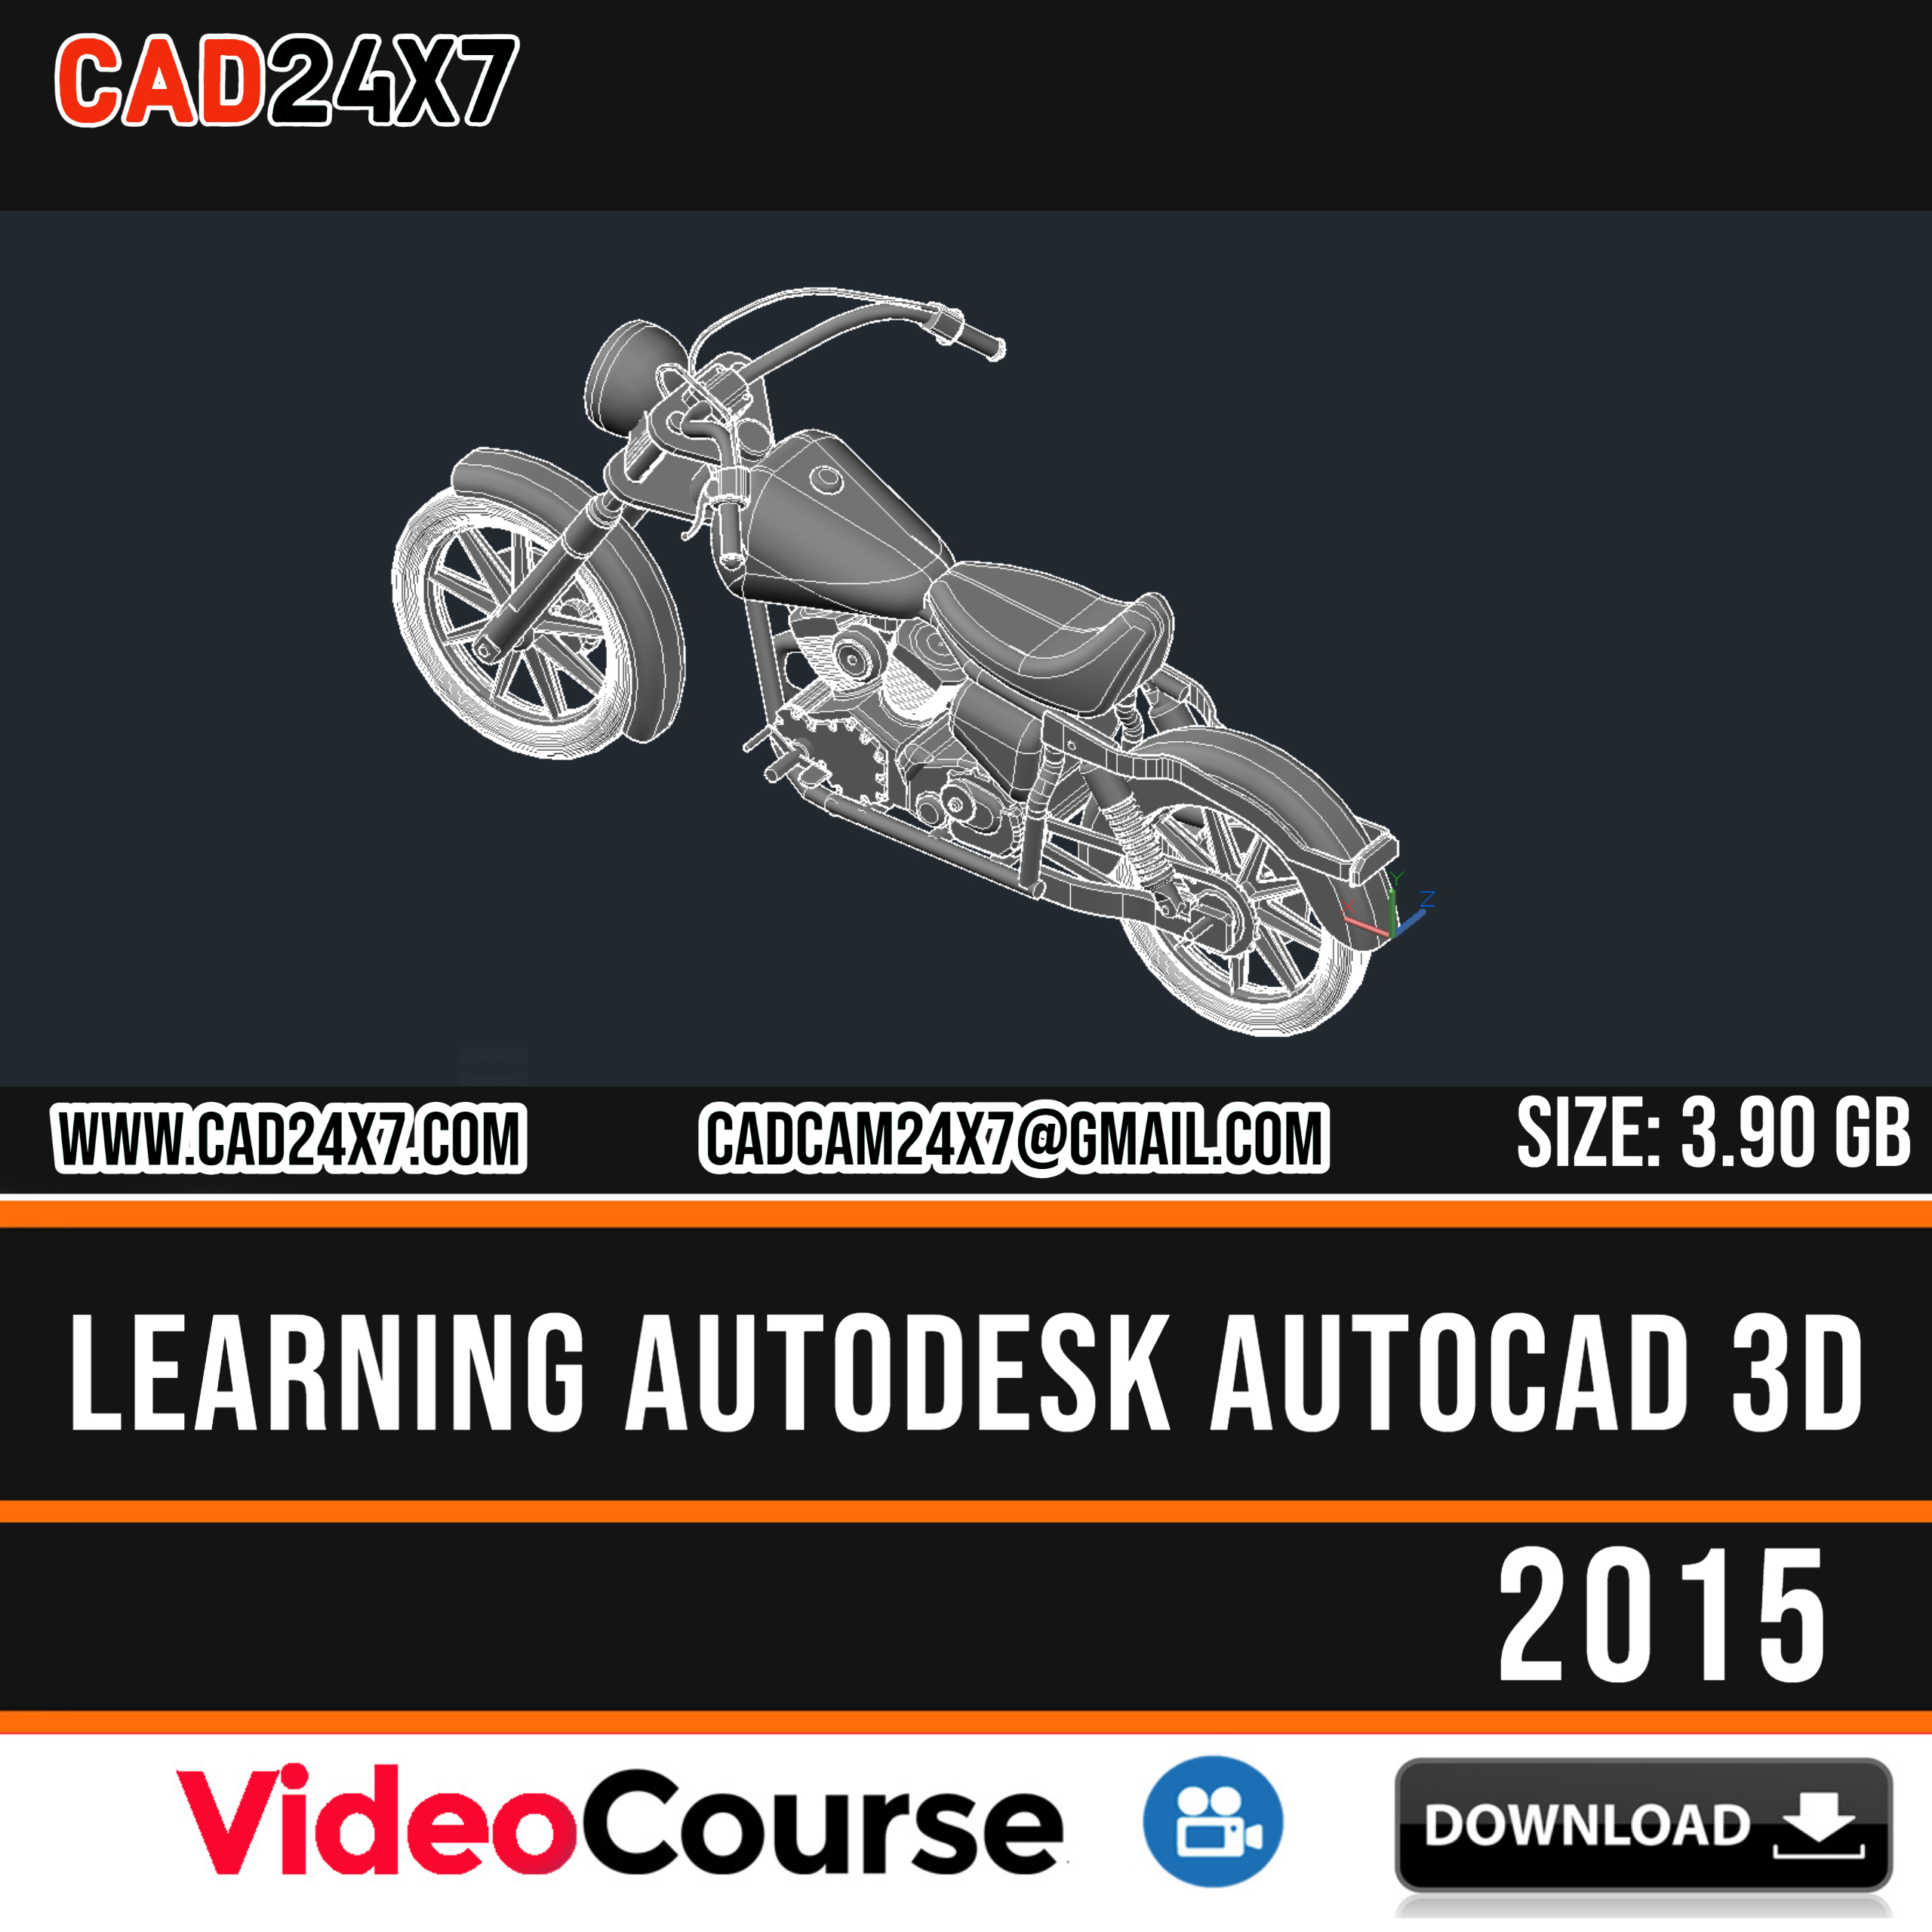 Learning Autodesk AutoCAD 3D 2015